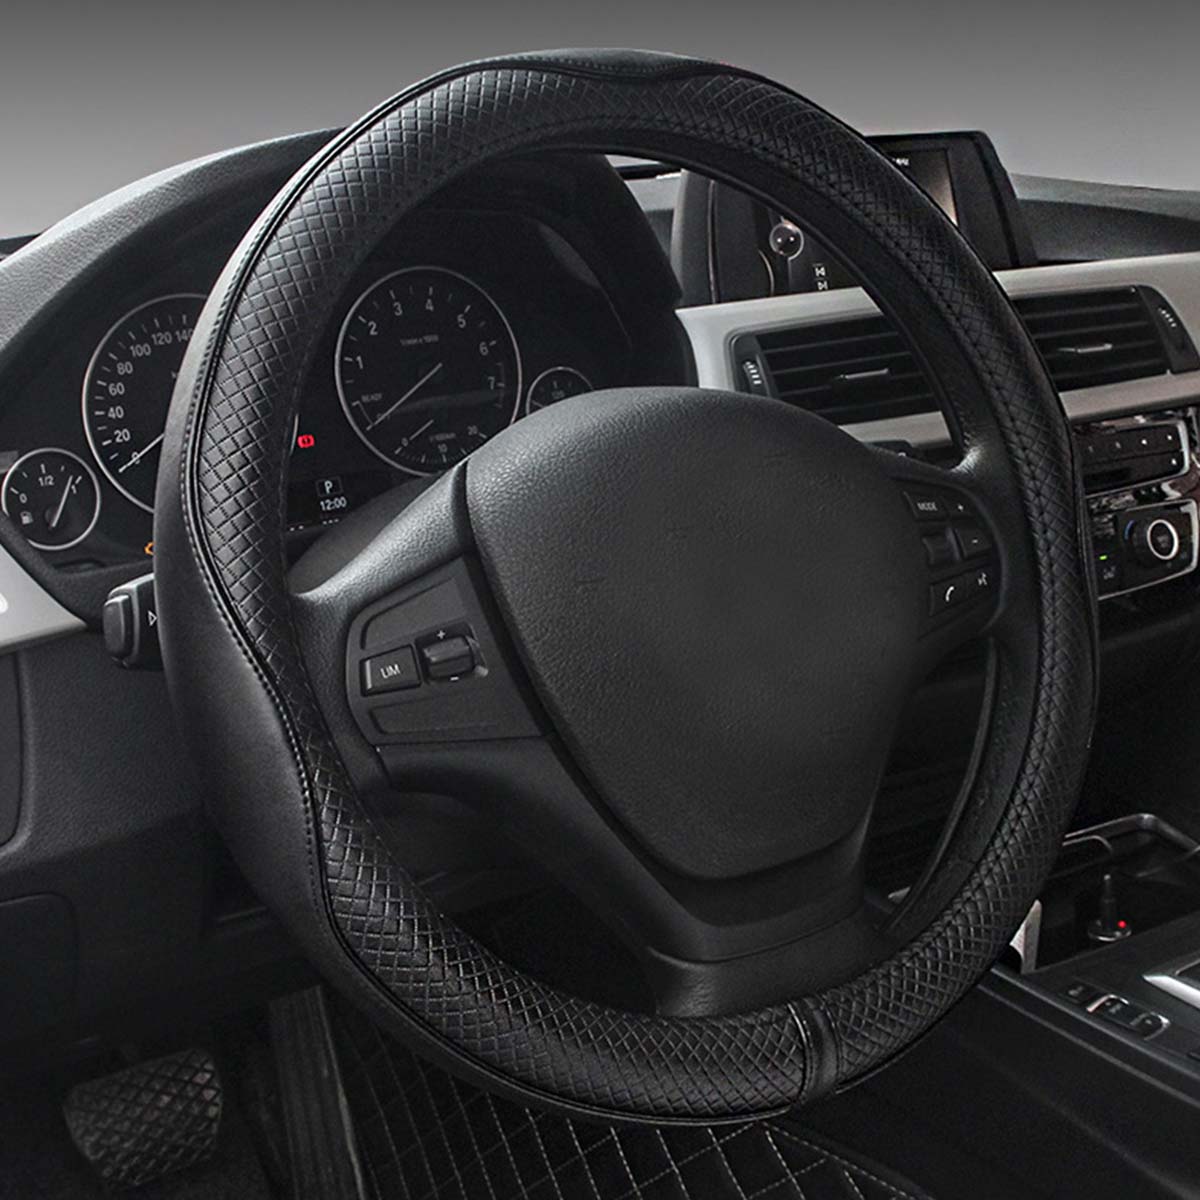 Enhance Your Ride with a Stylish Cadillac Steering Wheel Cover